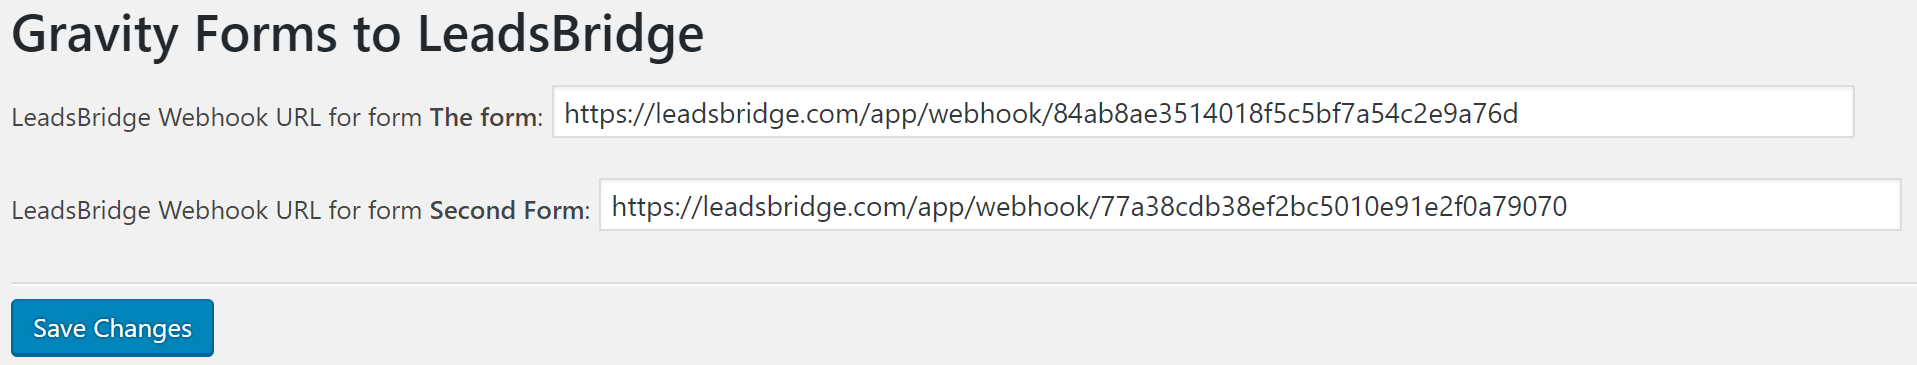 Set the webhooks to LeadsBridge in this way.